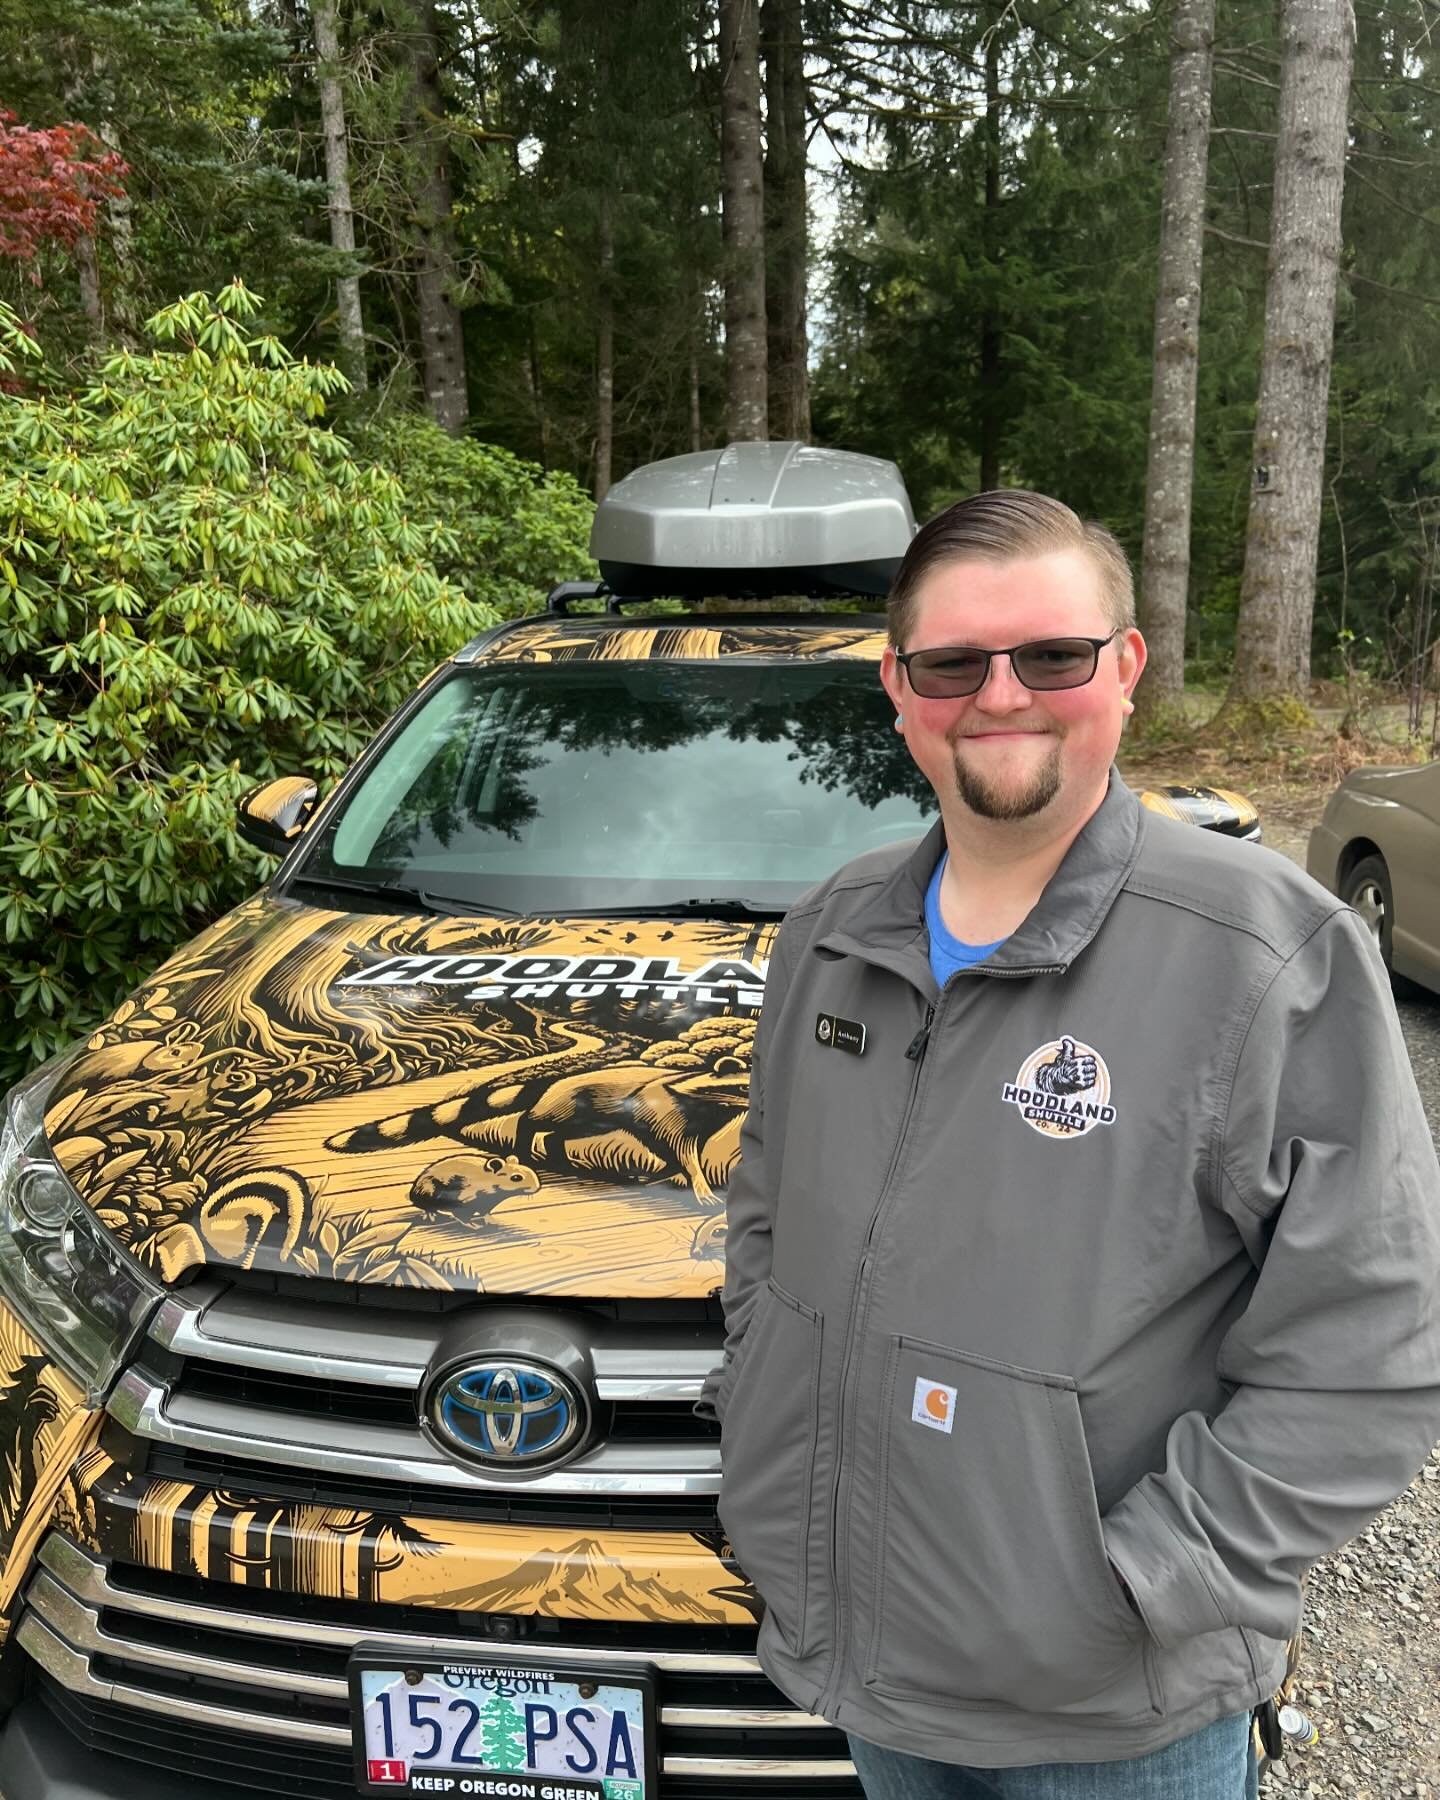 Driver spotlight! Welcome Anthony to the Hoodland Shuttle crew! 

Anthony will be driving till midnight tonight! 

#hoodlandshuttle #shuttleheads #mthood #oregon #pnw #skiing #biking #boarding #shuttle #vanlife #mthoodterritory